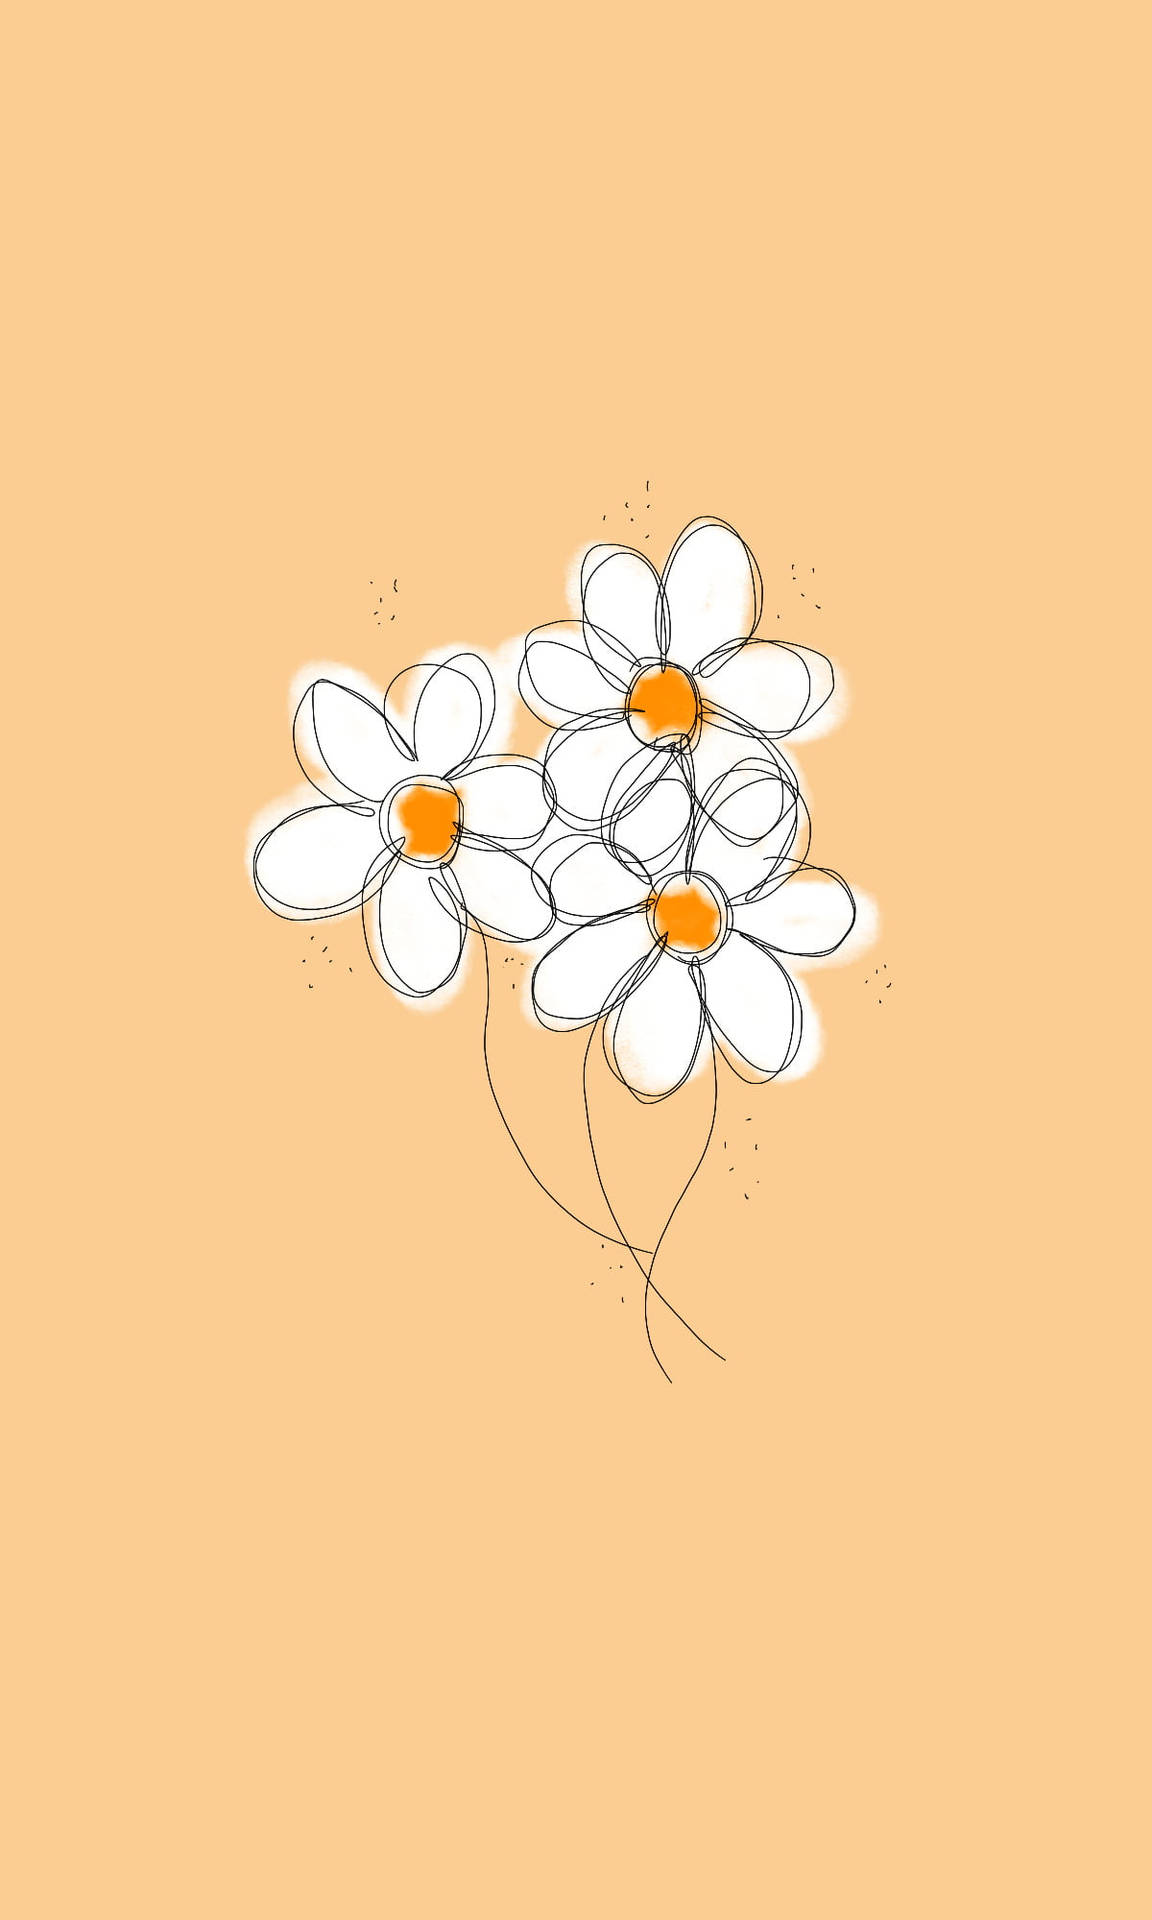 Blooming Pure Serenity: A White Daisy Illustration Wallpaper